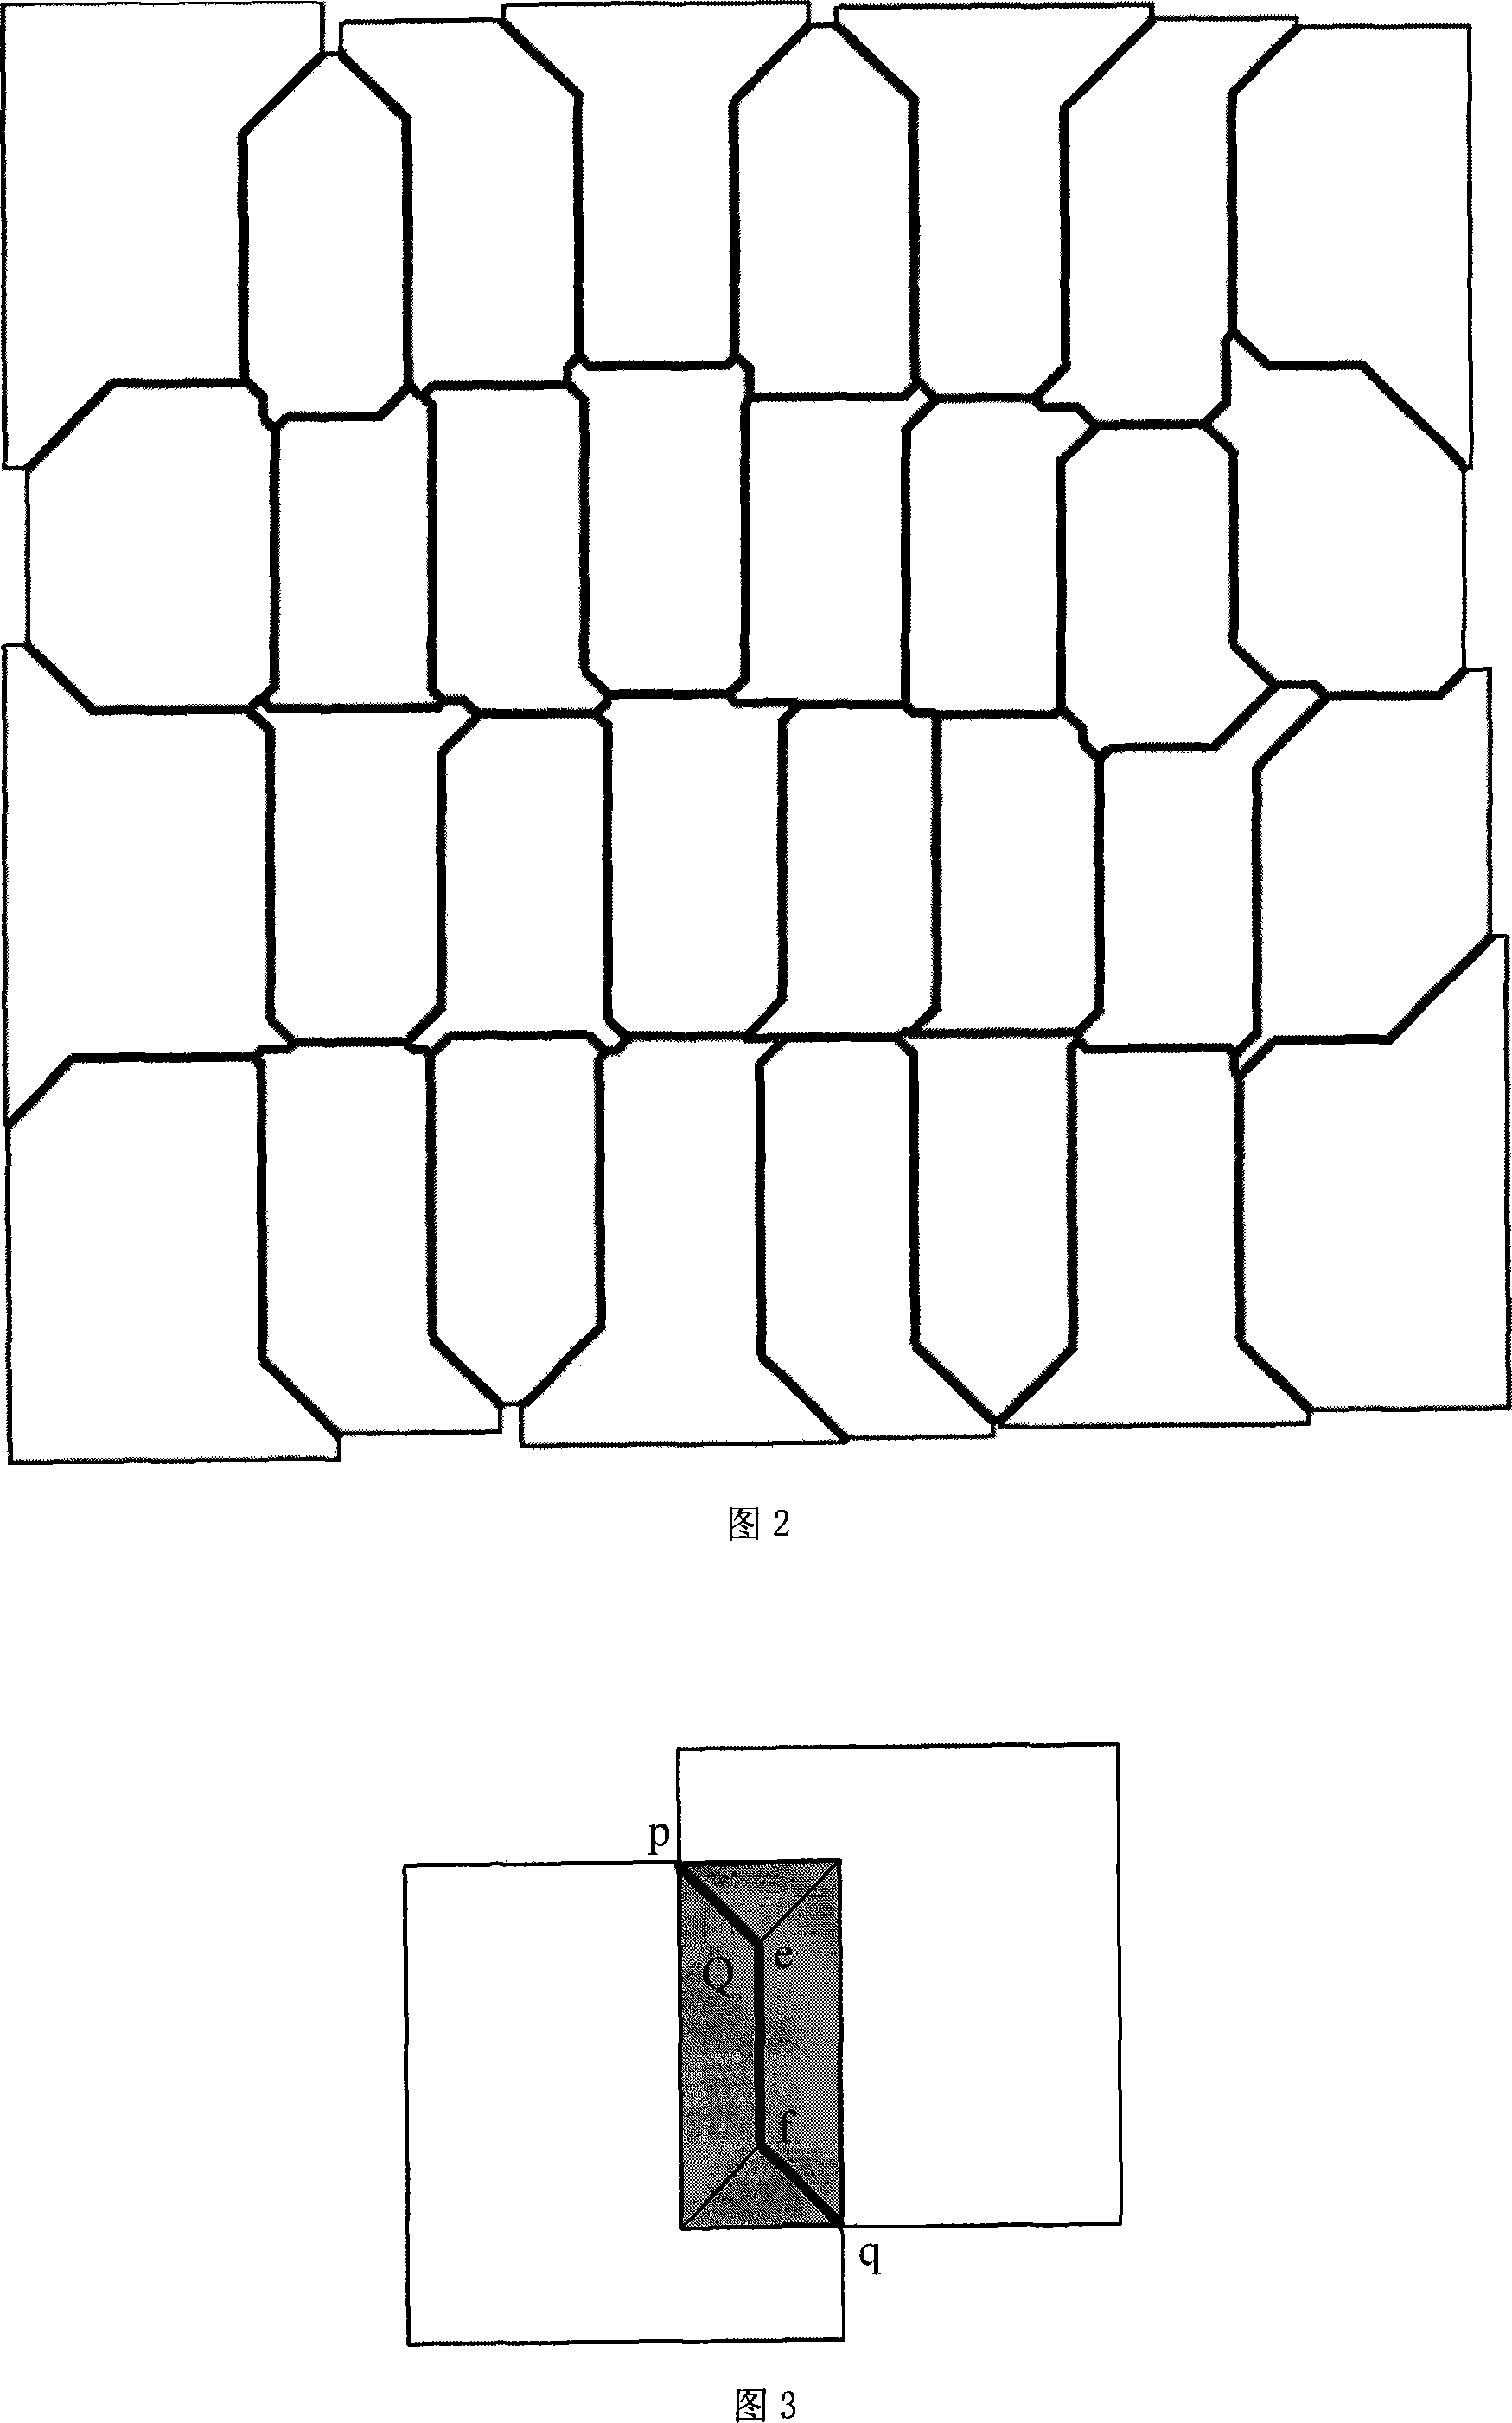 Method for automatically generating joint line network